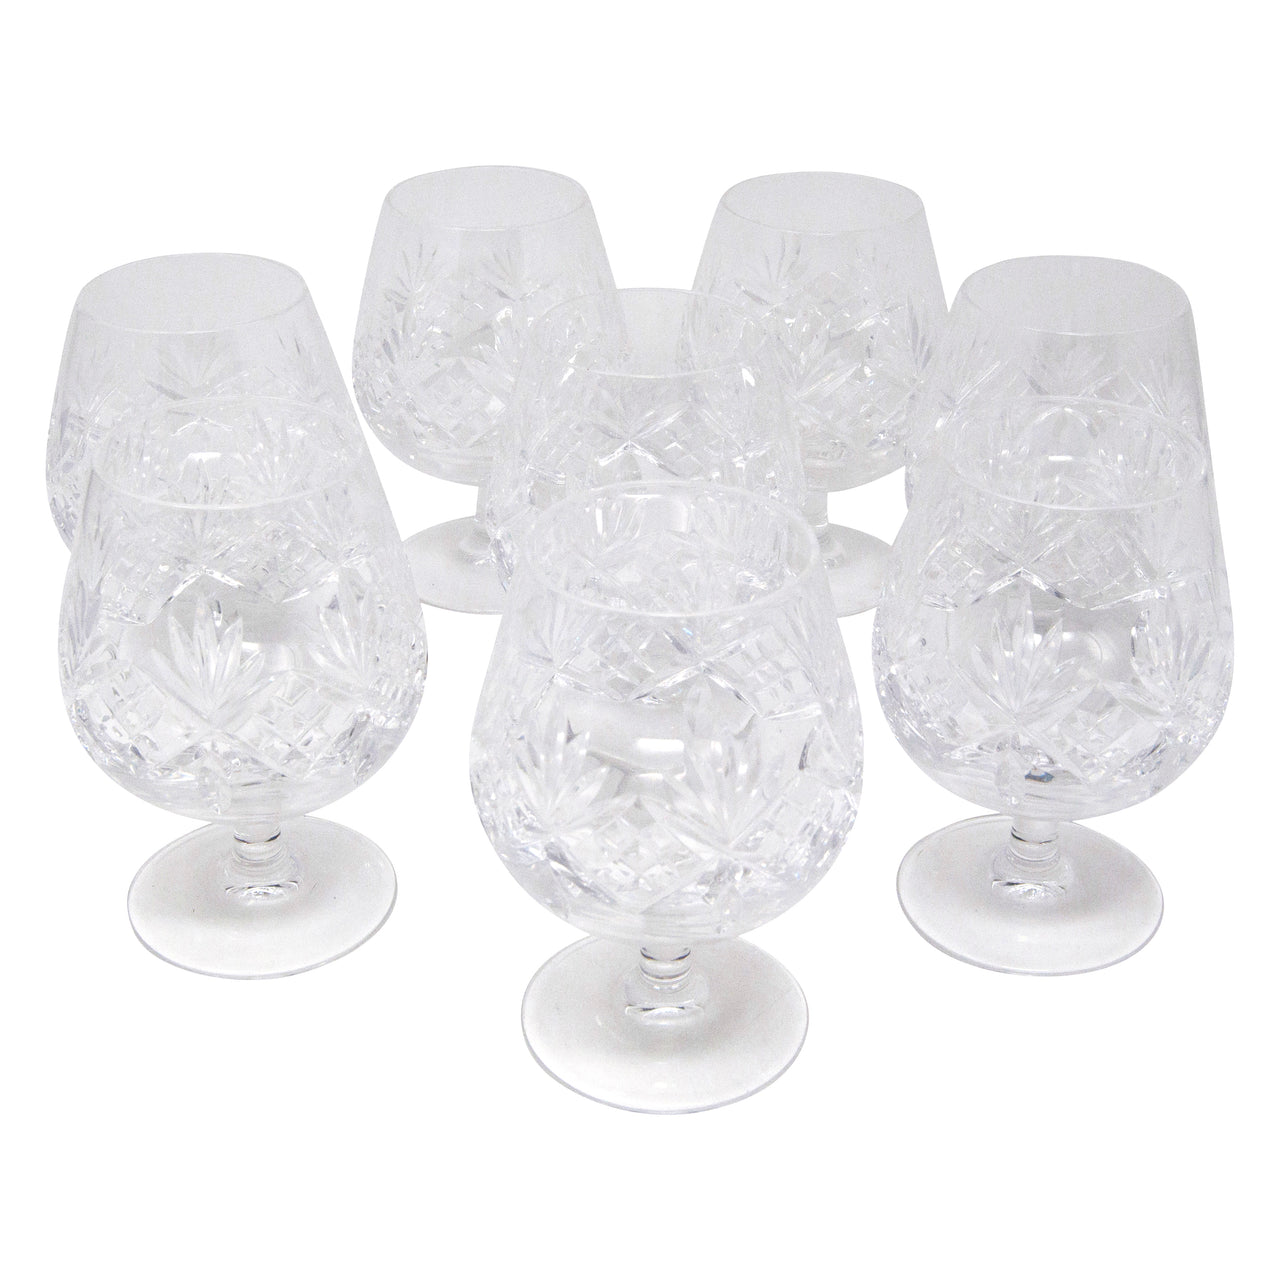 Vintage Cut Crystal Snifters